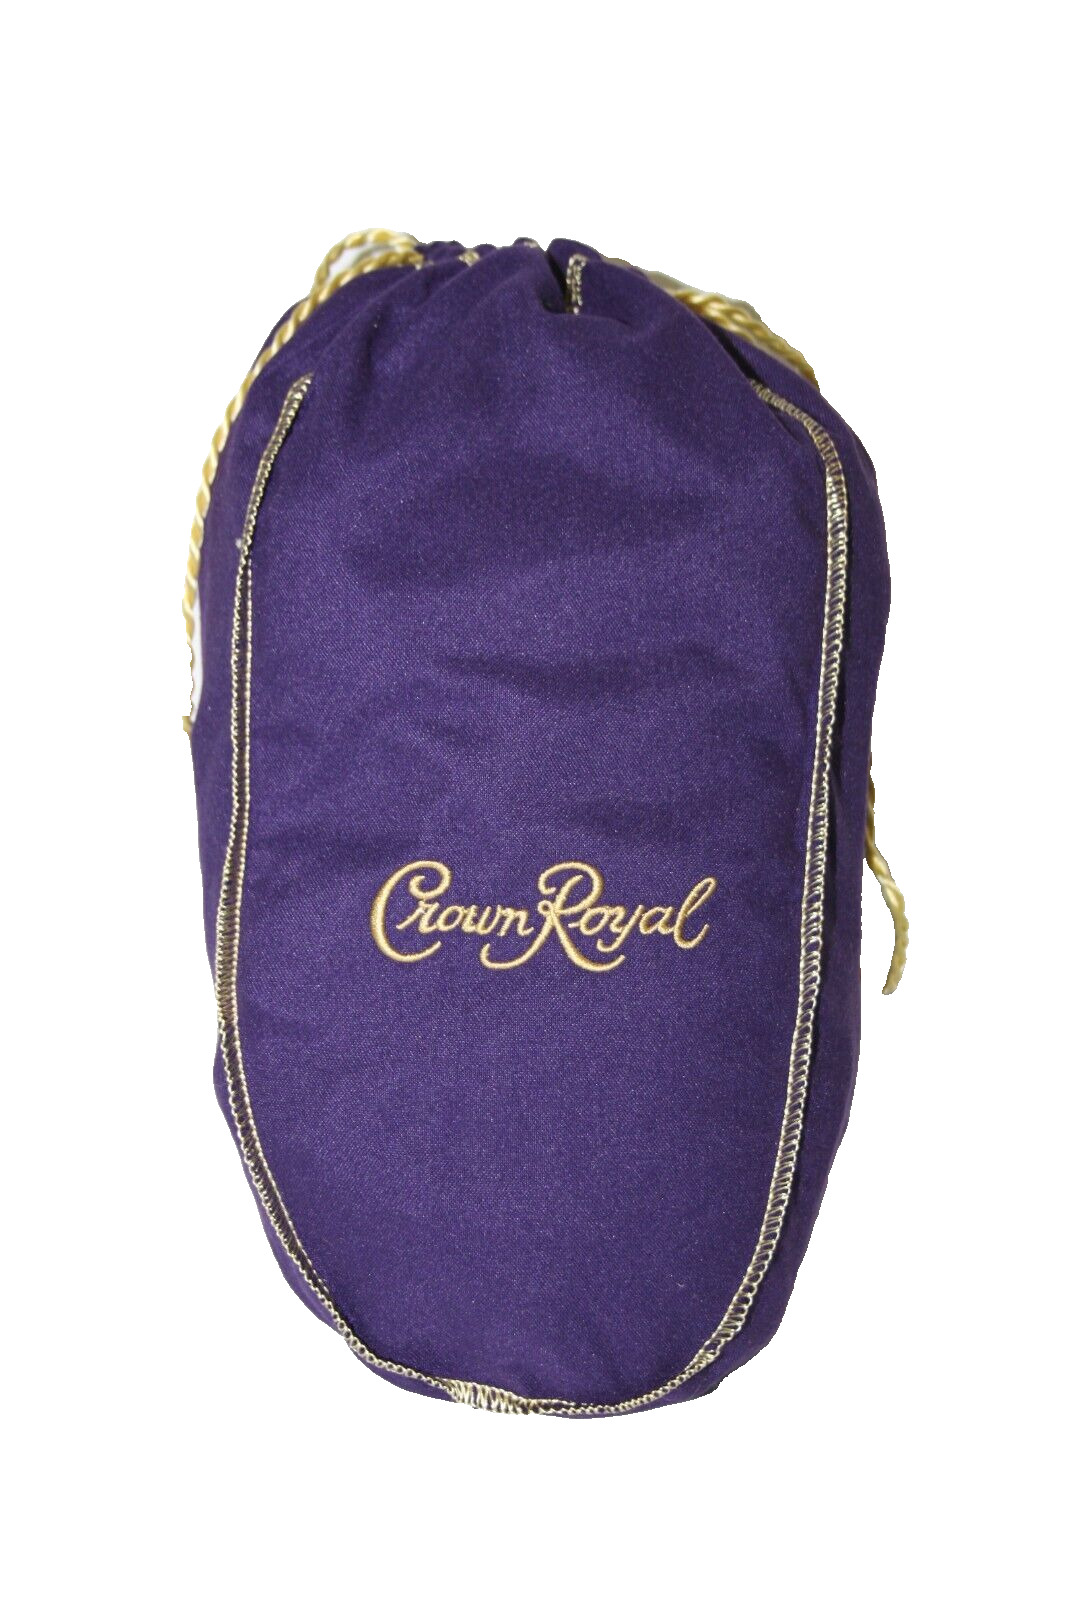 Crown Royal Purple Bag by Royal Crown Large 12 Inch with Drawstring New